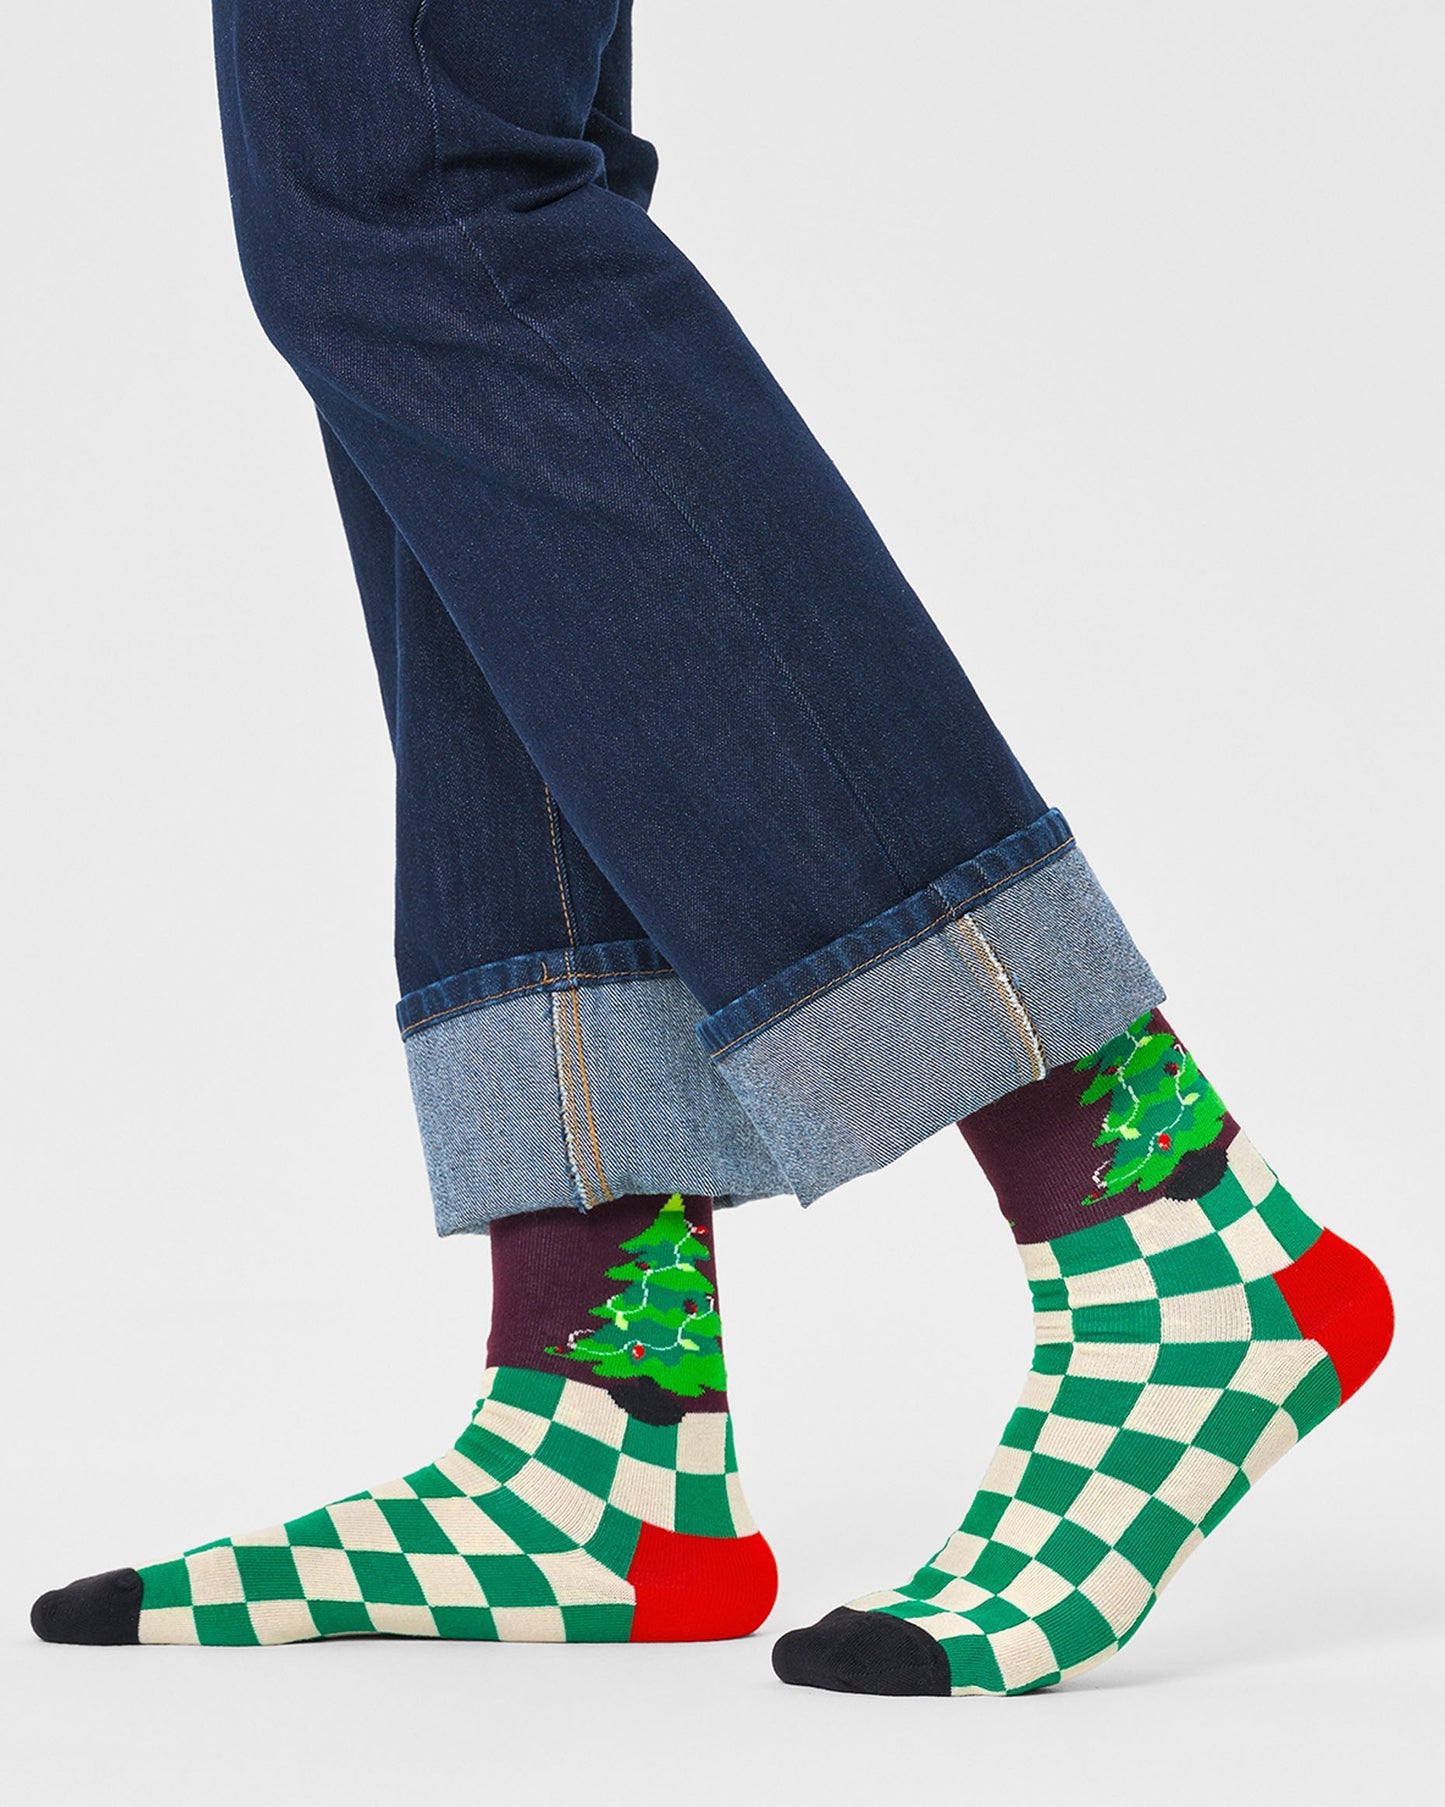 Happy Socks P000262 Christmas Tree Socks - Checkered green and cream socks with a Xmas tree motif on the top (inside and outside) with a burgundy background, red heel and black toe. Worn by a man wearing turned up denim jeans.